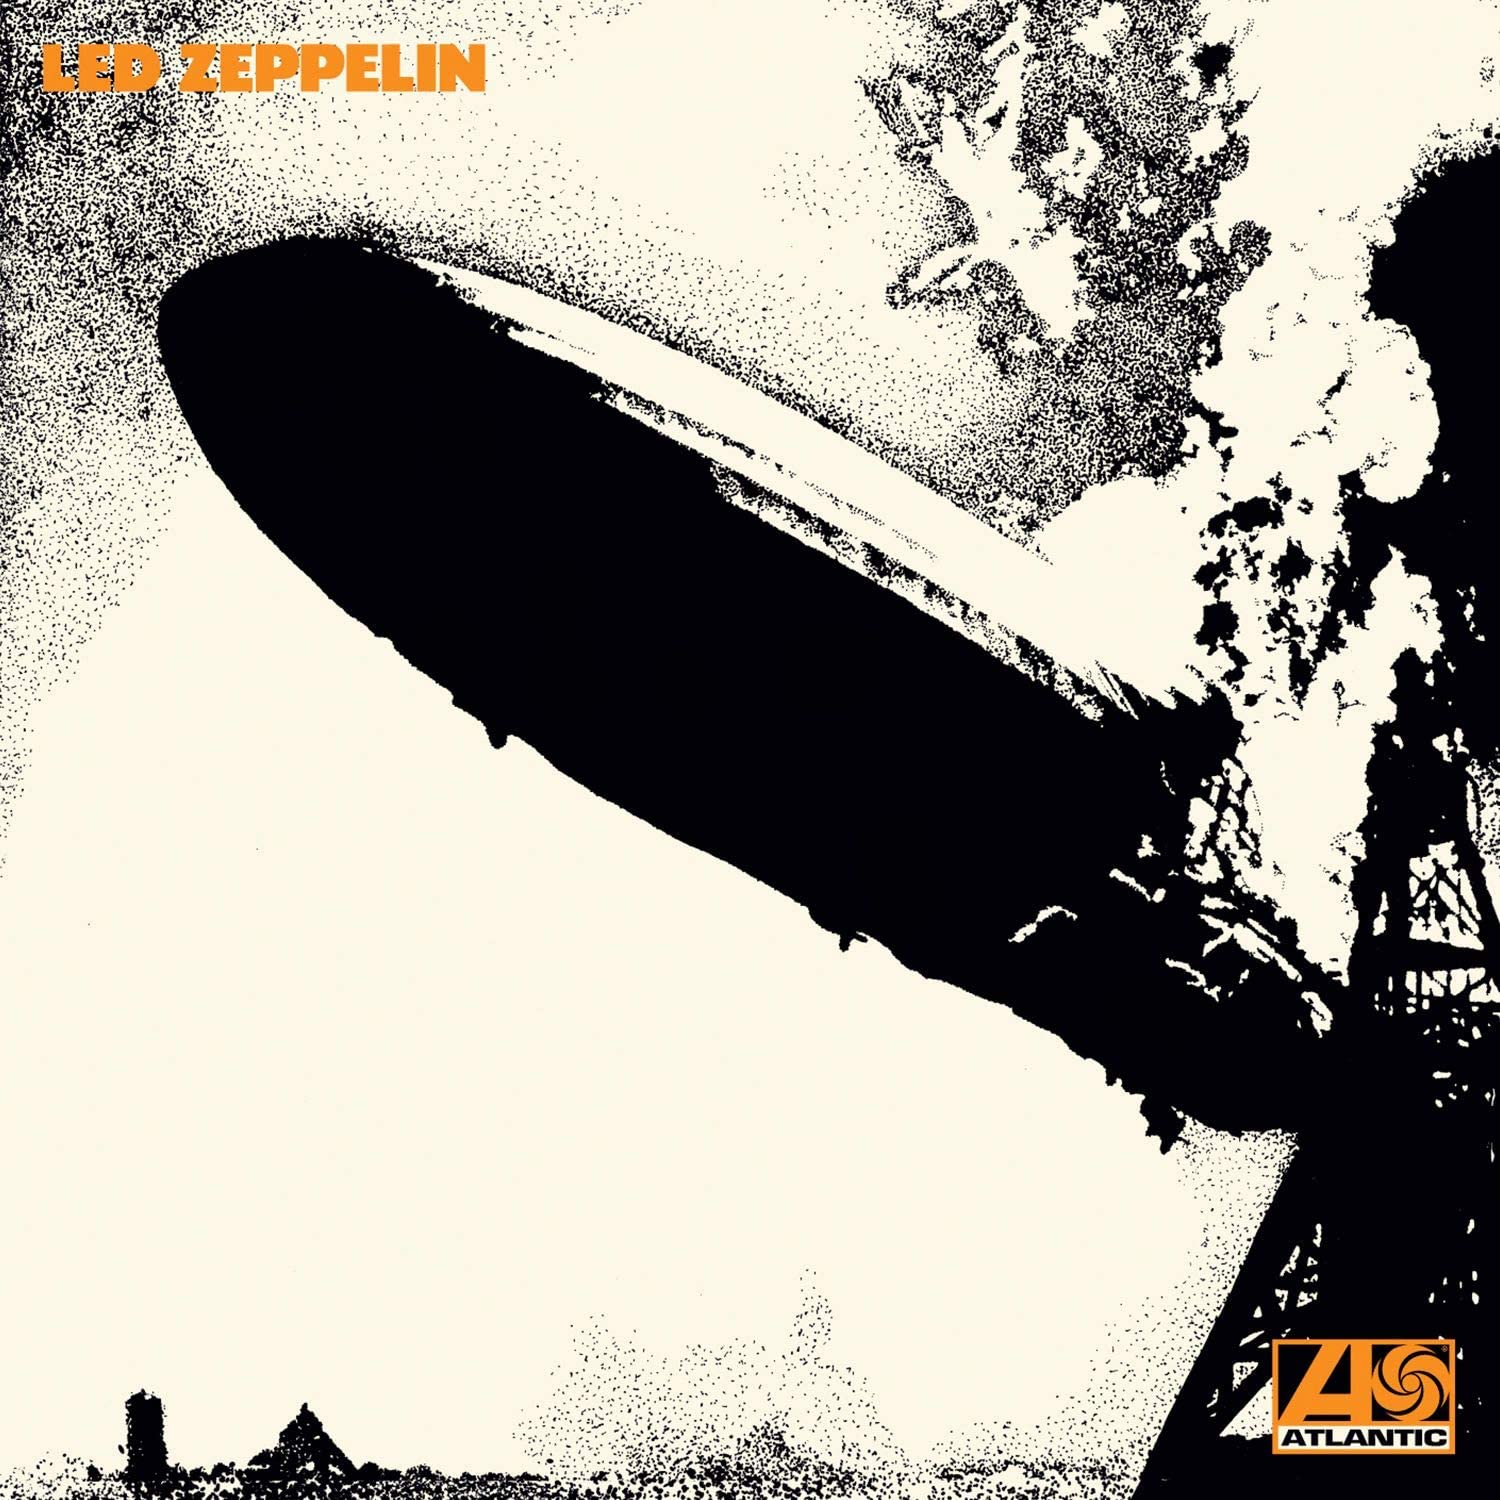 Iconic debut album on Vinyl fro the legendary Led Zeppelin featuring Dazed & Confused,  Communication Breakdown and Good Times Bad Times.